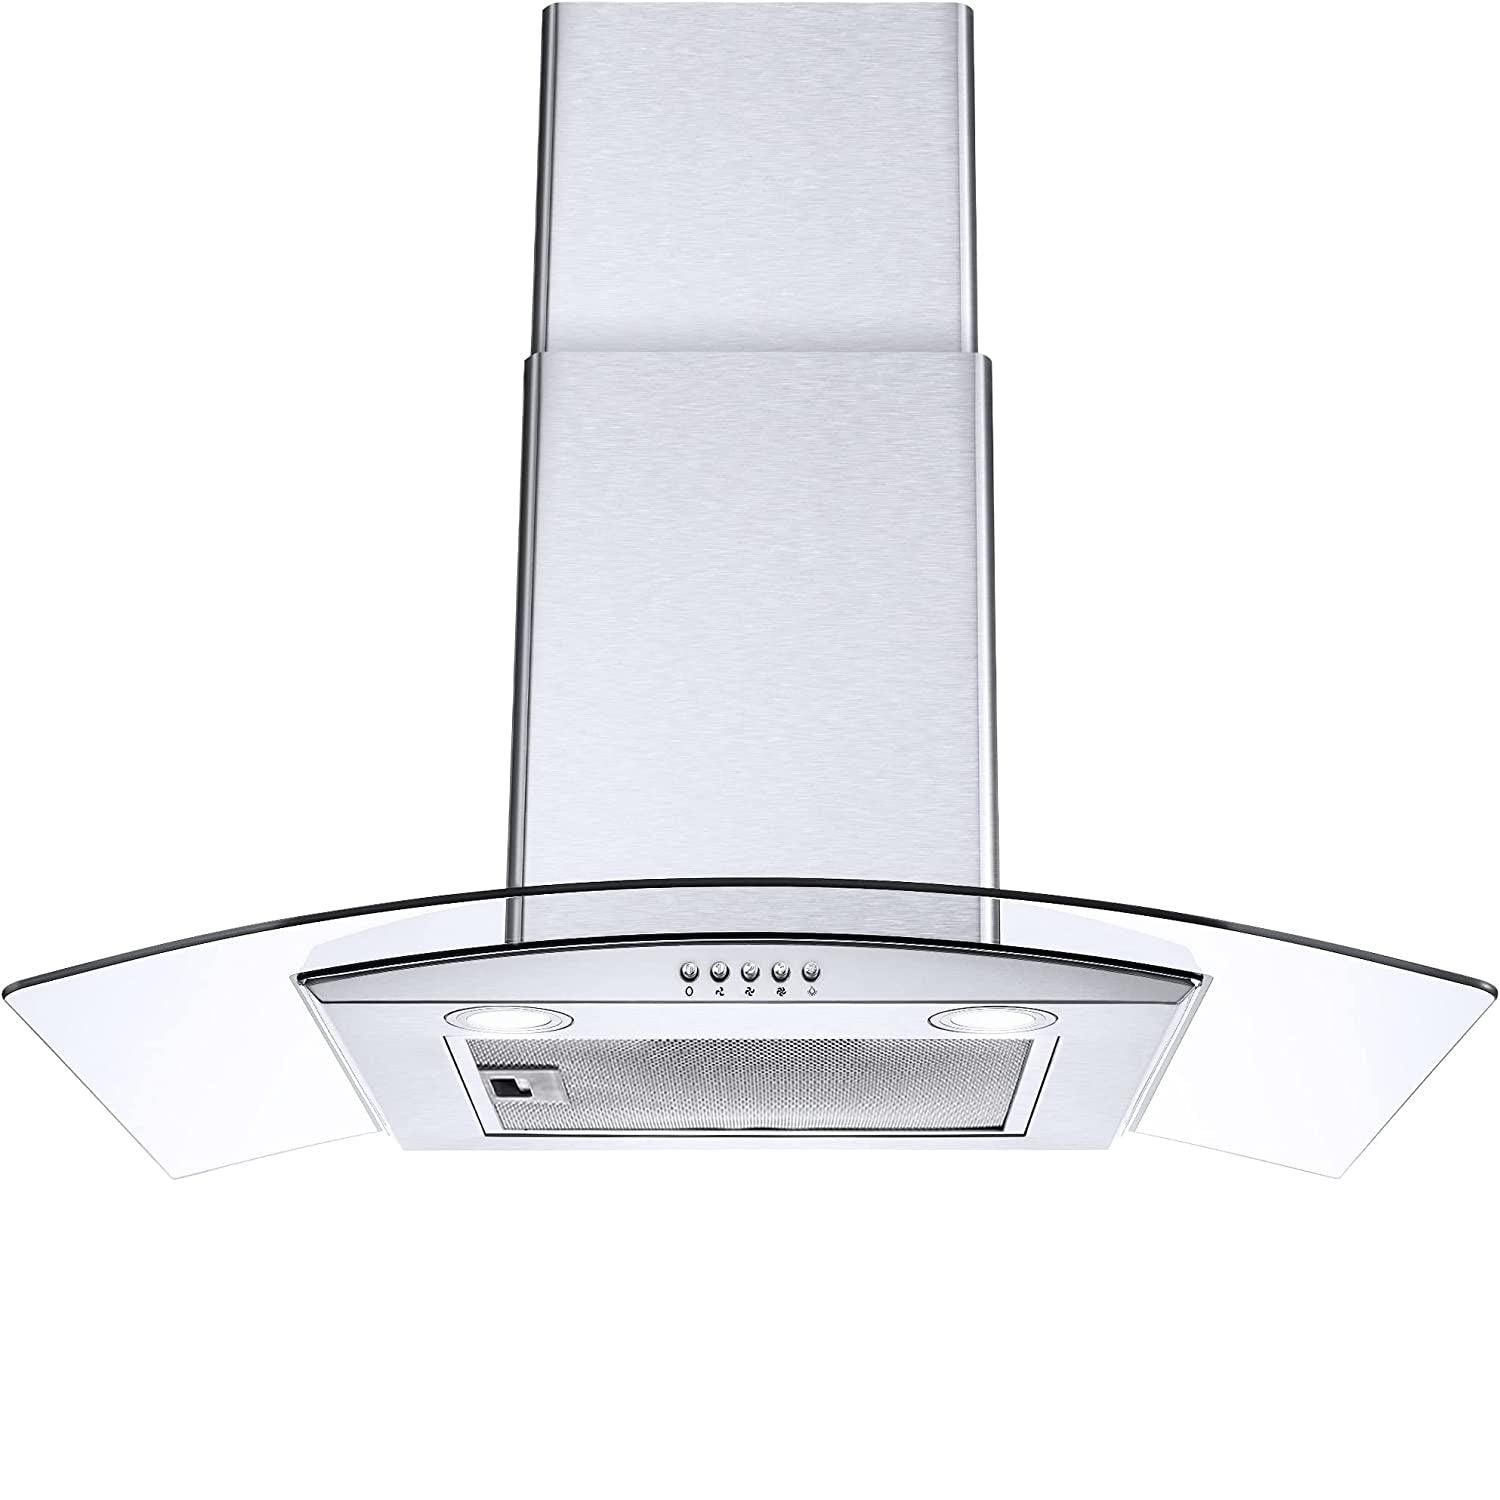 Tieasy 30 Inch Wall Mount Kitchen Hood with DuctedDuctless Convertible Duct - 3375A